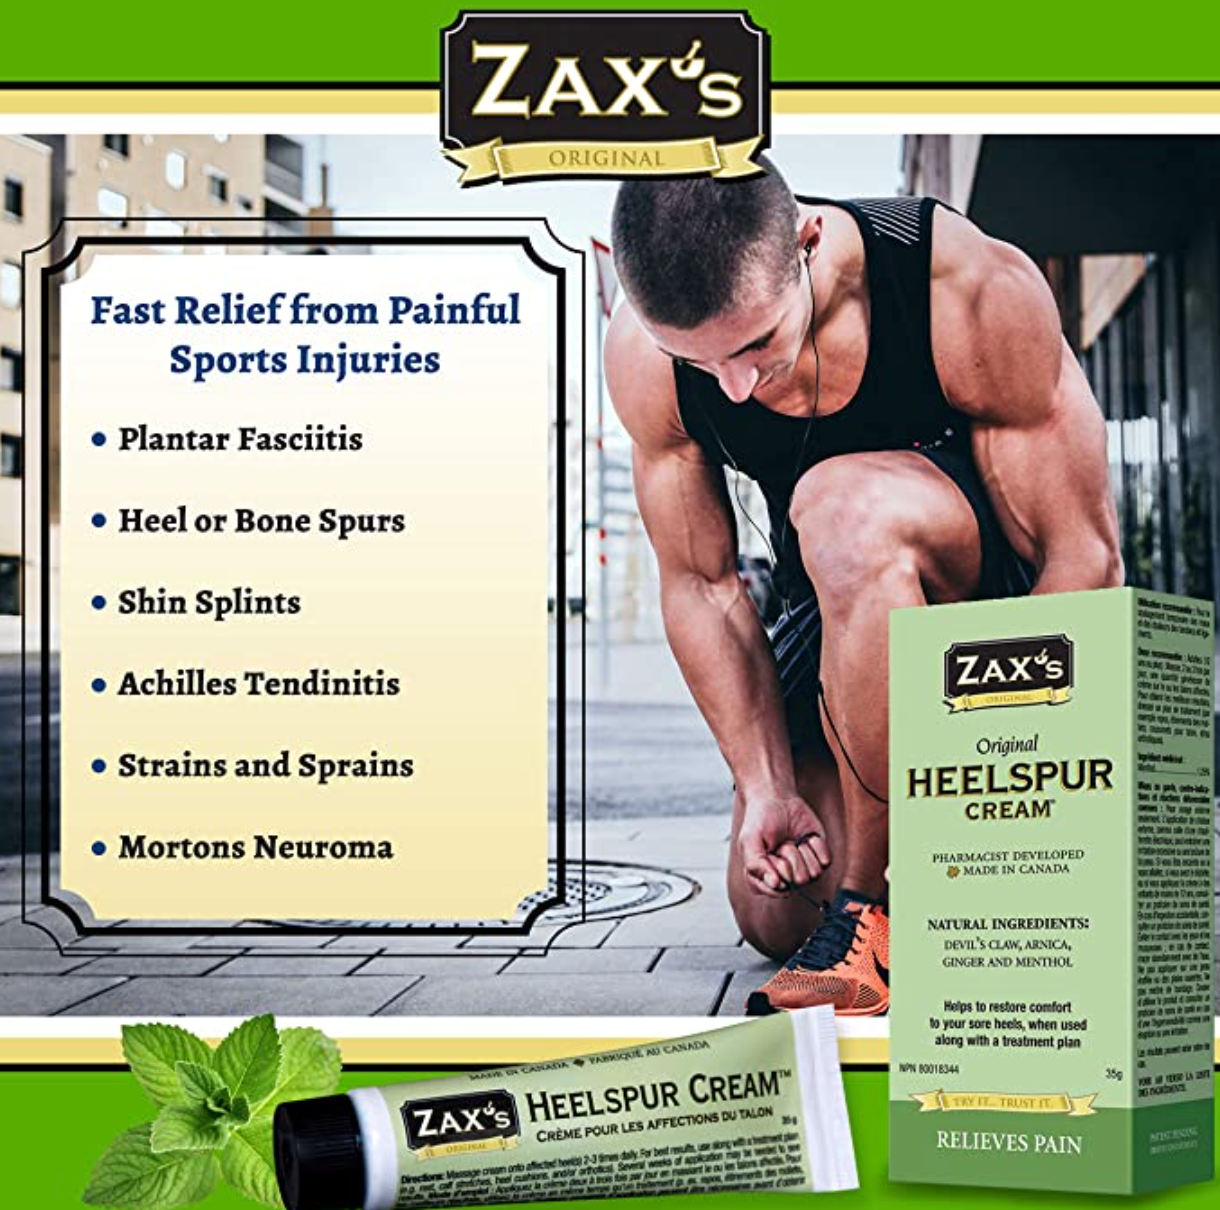 Zax's Original Heelspur Cream - Top Selling Foot Pain Cream: Fast Pain &  Inflammation Relief Cream for Plantar Fasciitis, Heel Spurs, Shin Splints,  Achille's Injuries and Morton's Neuroma - Pharmacist Developed, Natrual